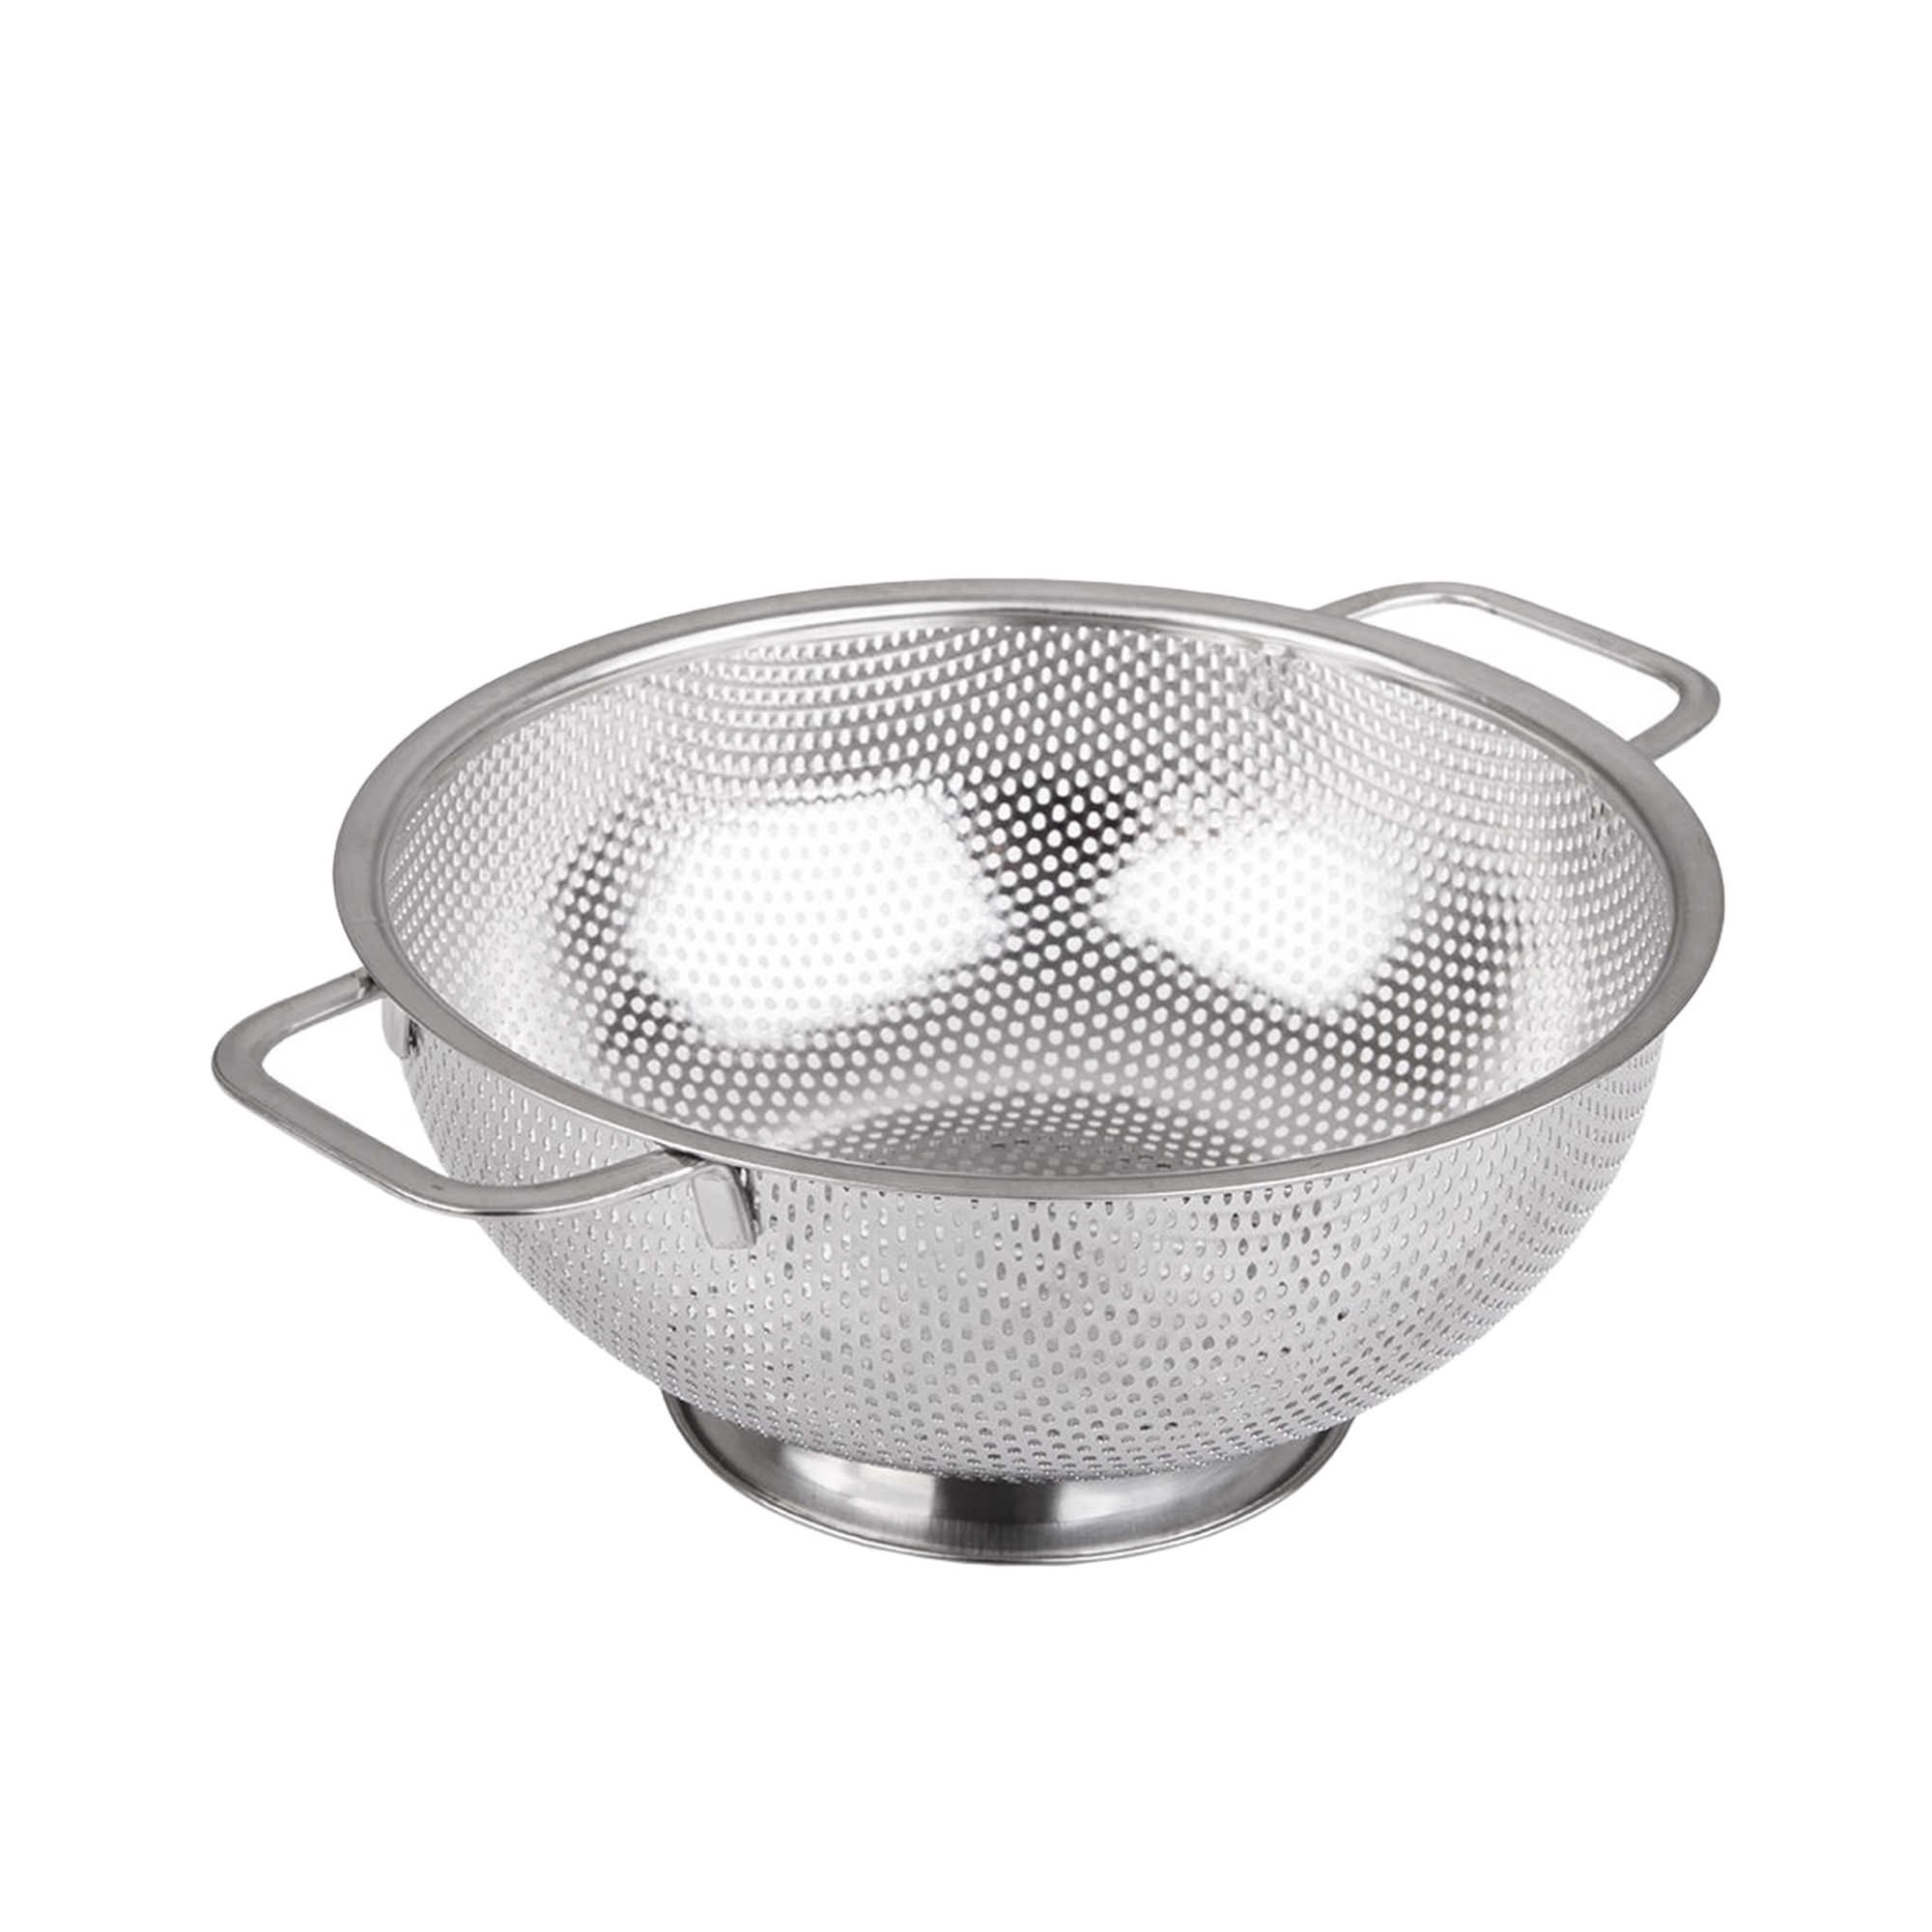 Appetito Perforated Colander 22cm Stainless Steel Image 1